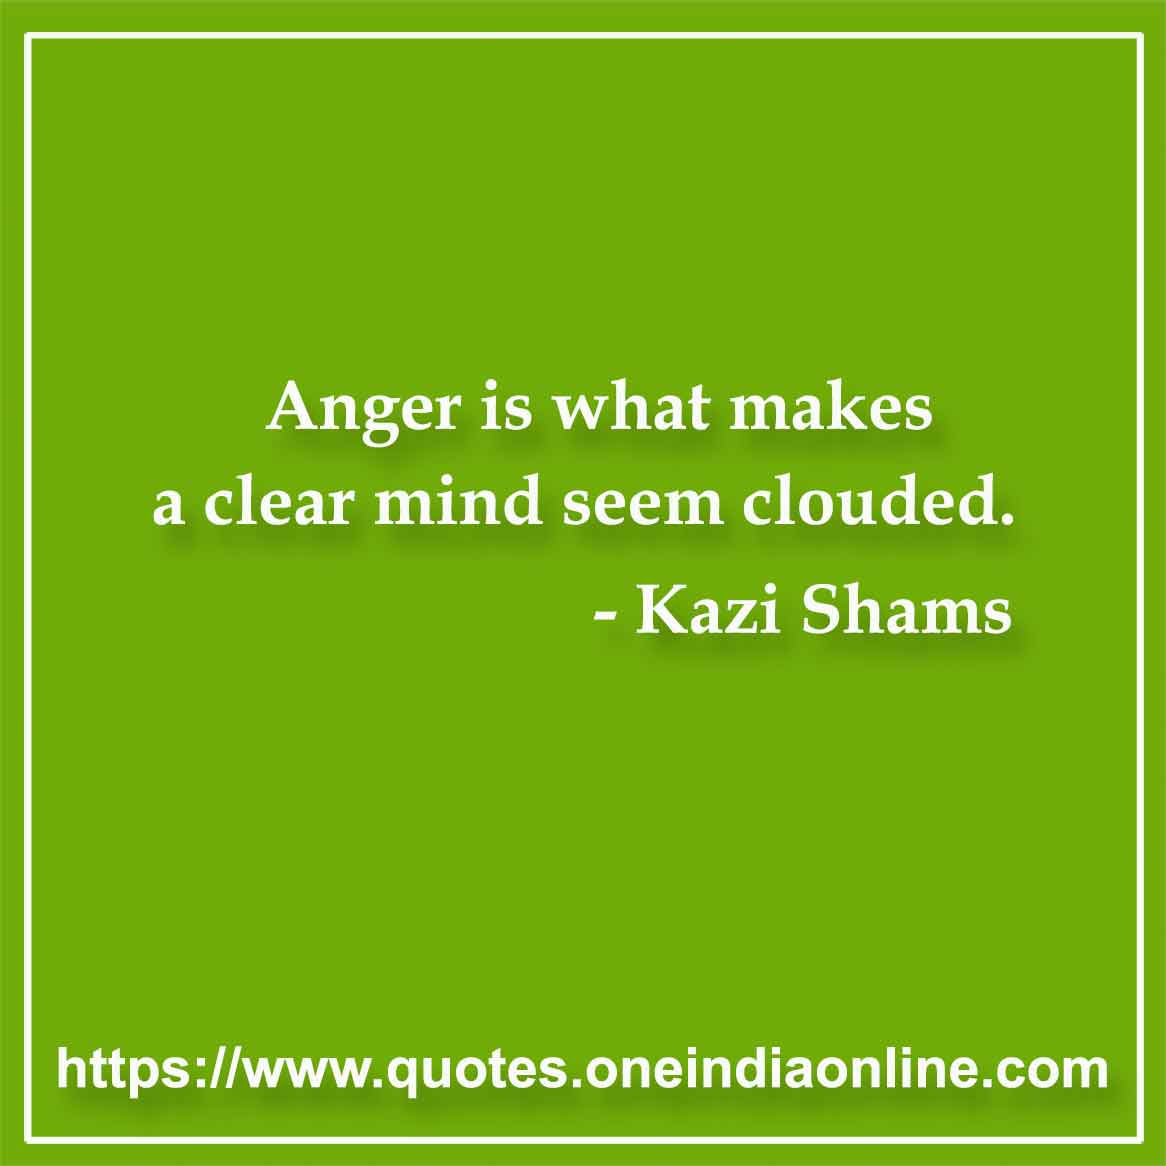 Anger is what makes a clear mind seem clouded.

- Quotes by Kazi Shams